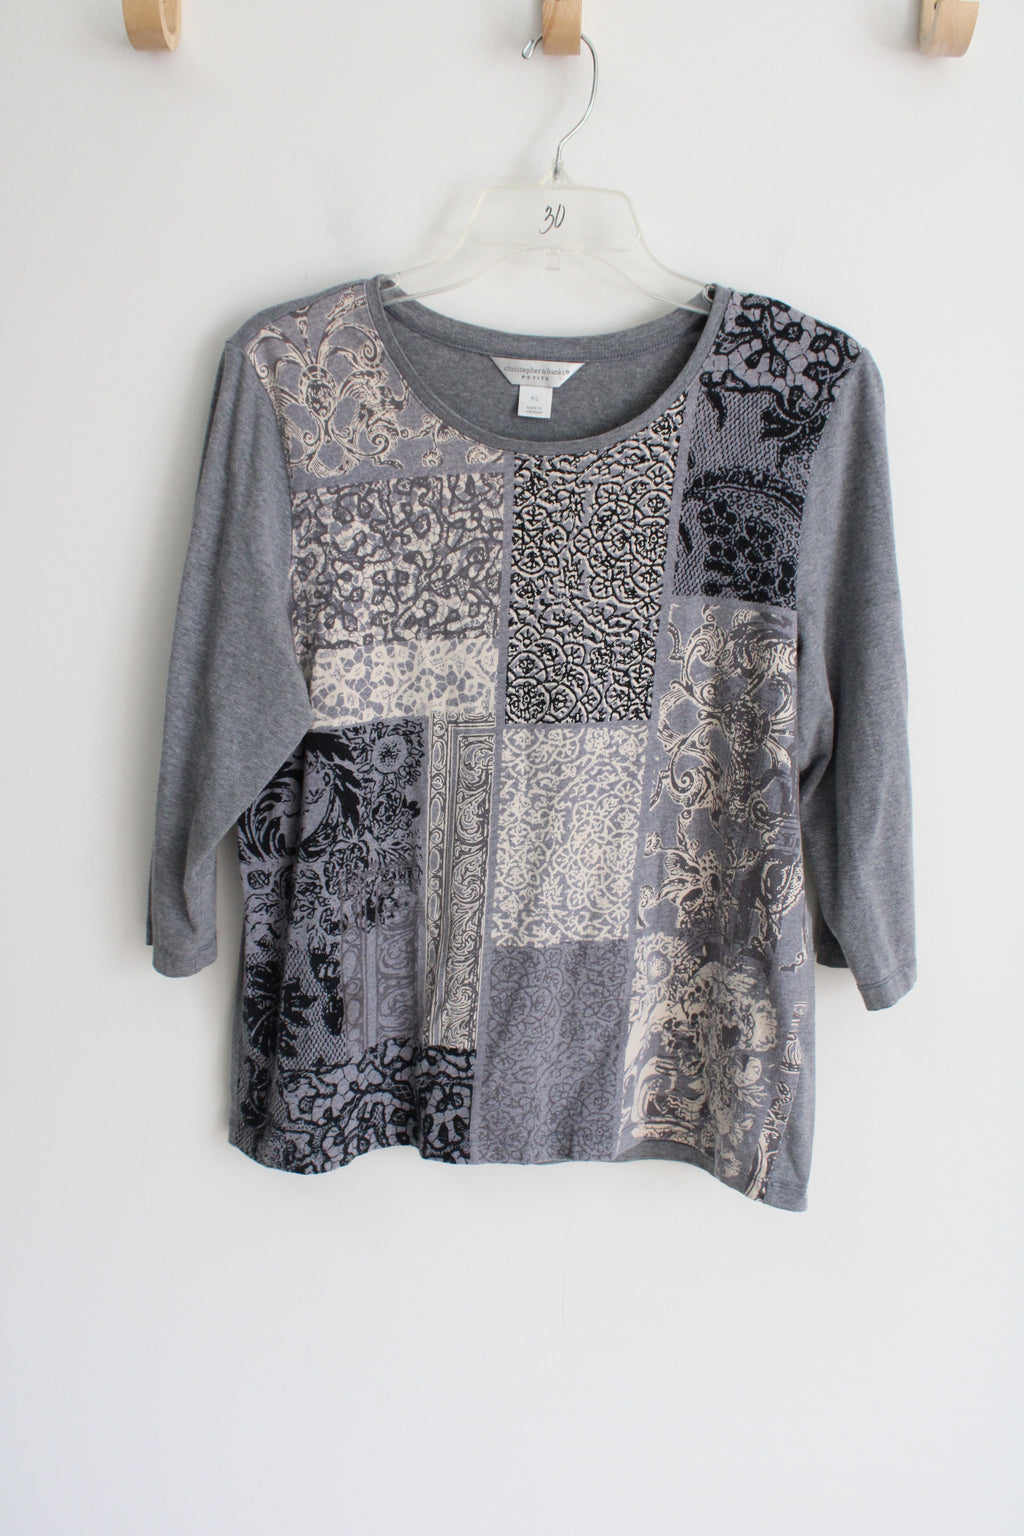 Christopher & Banks Gray Patterned Top | L Petite